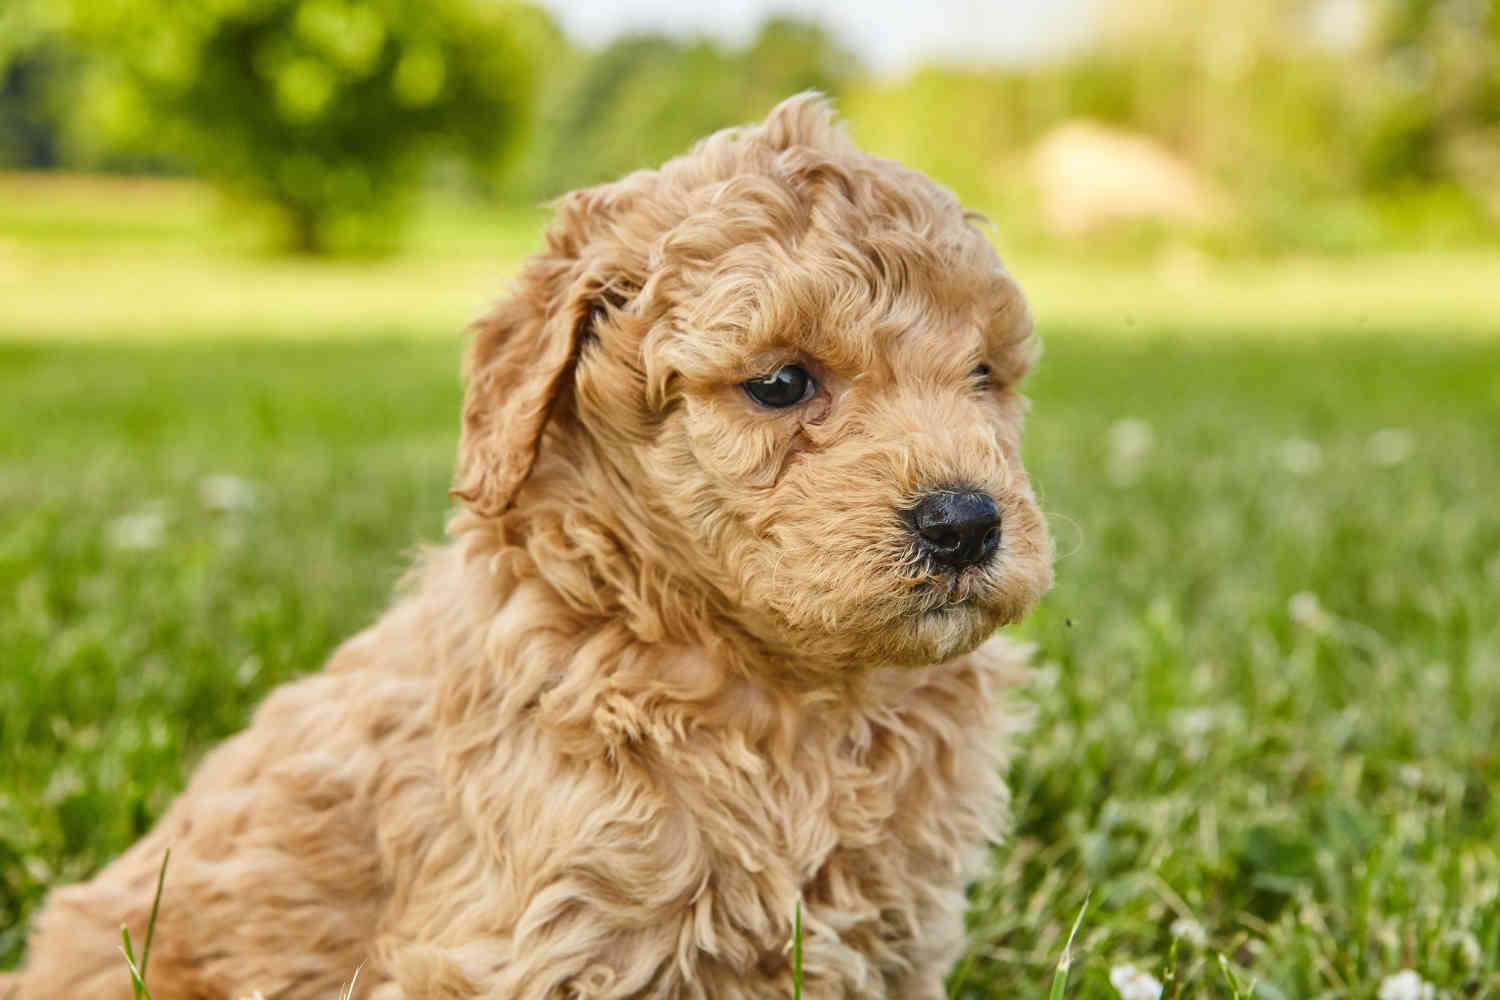 Ear Care 101: How to Clean Your Goldendoodle's Ears Like a Pro